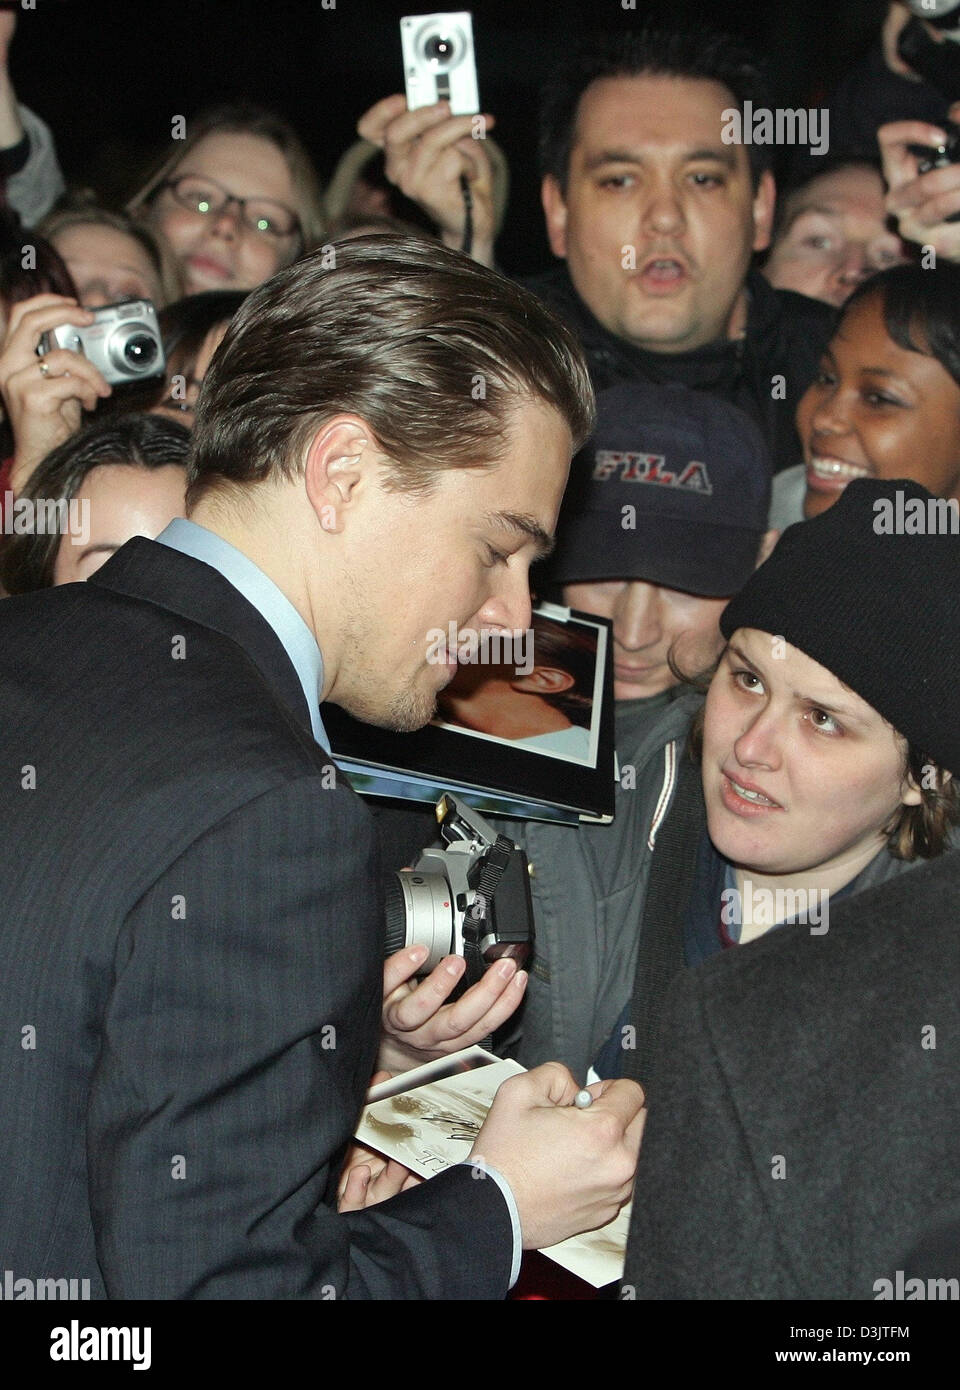 (dpa) - US actor Leonardo DiCaprio gives autographs prior to the German premiere of his film 'Aviator' at the Delphi cinema in Berlin, Germany, 7 January 2005. Stock Photo